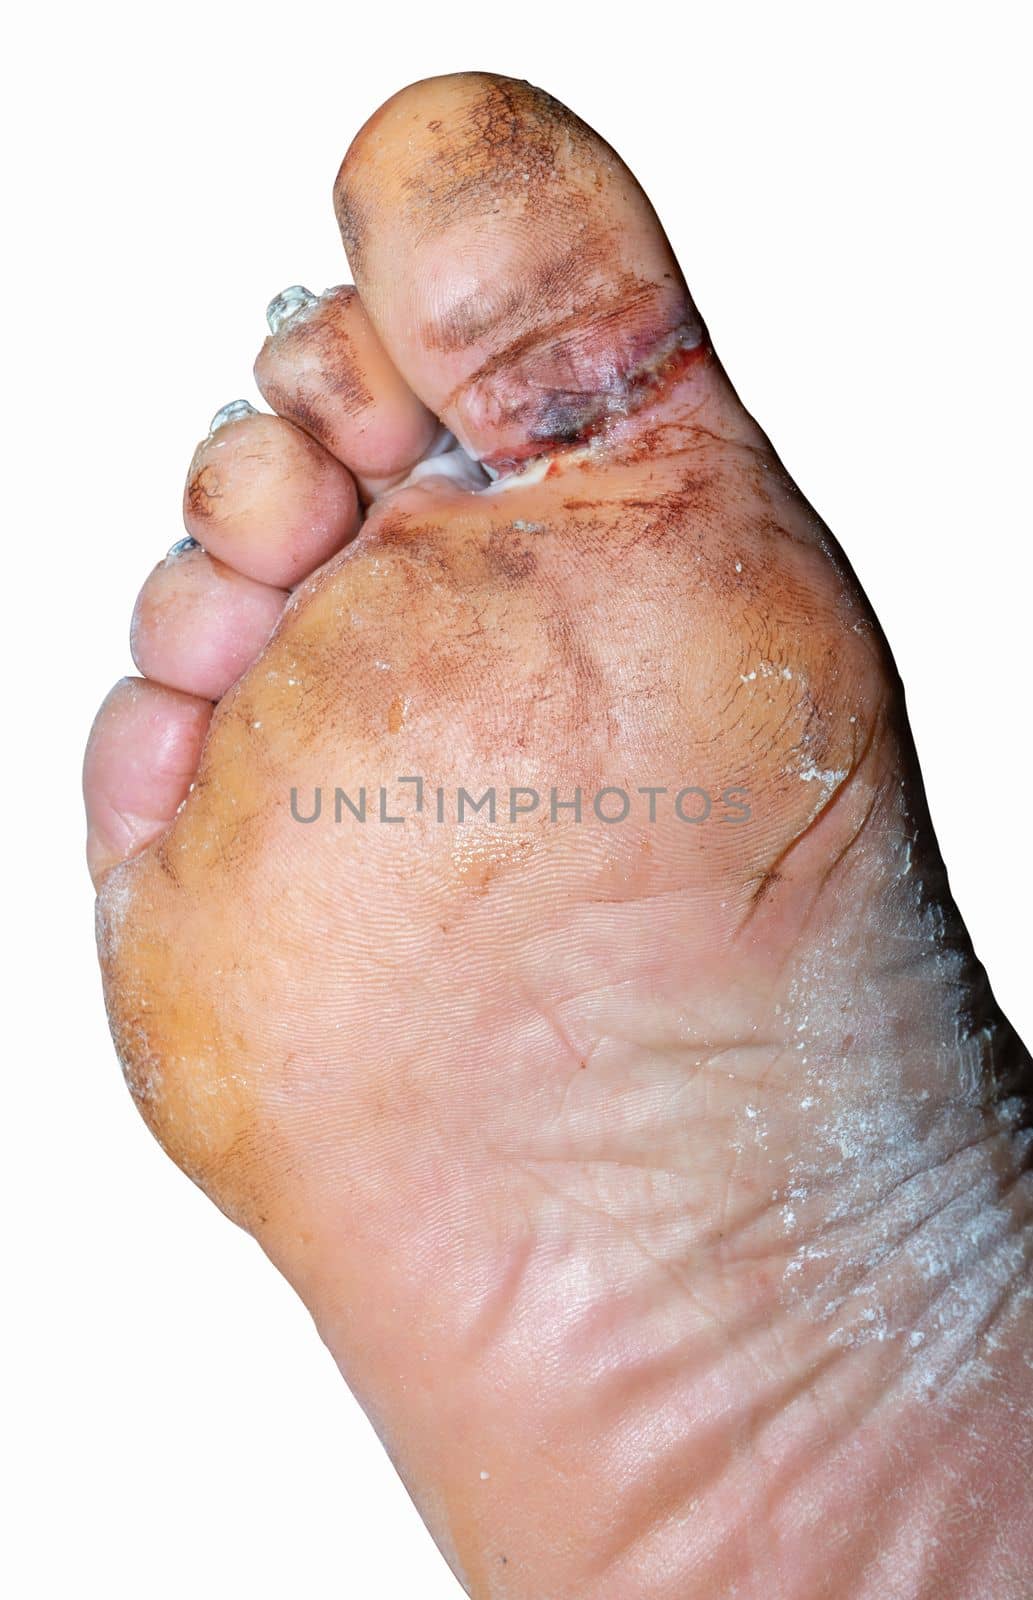 A large laceration between the big toe and the foot.